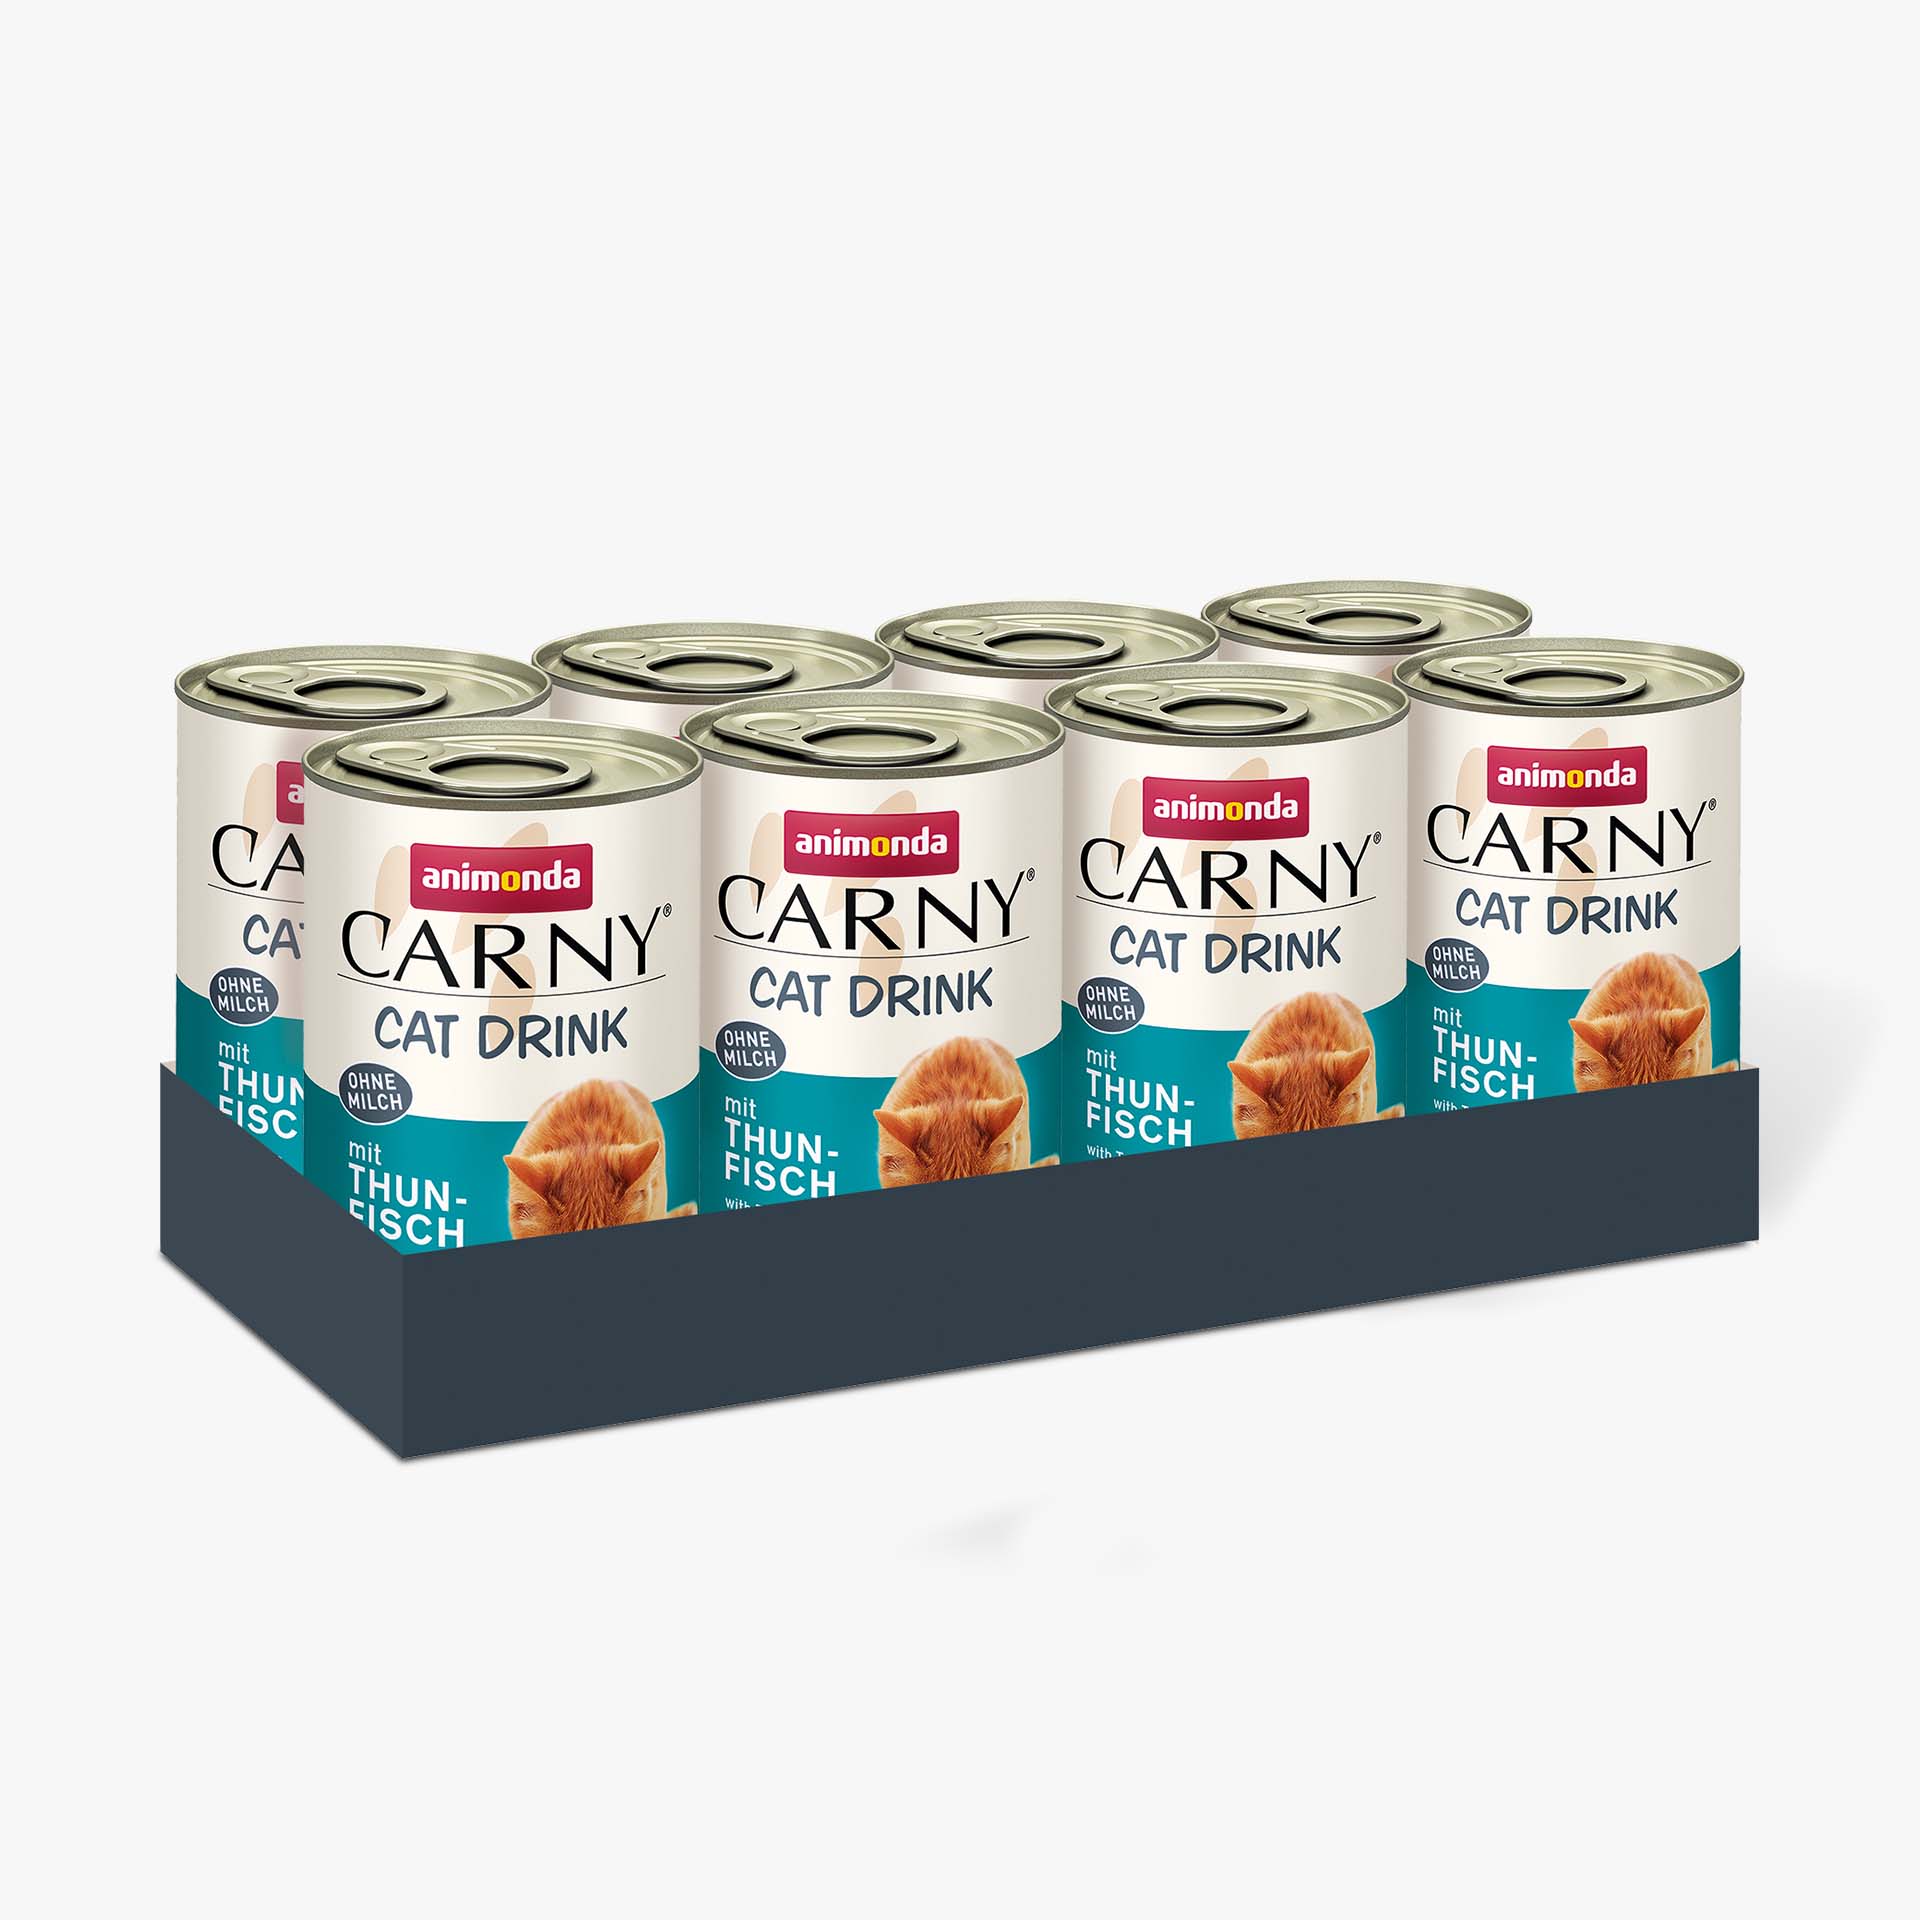 Carny Adult Cat Drink mit Thunfisch